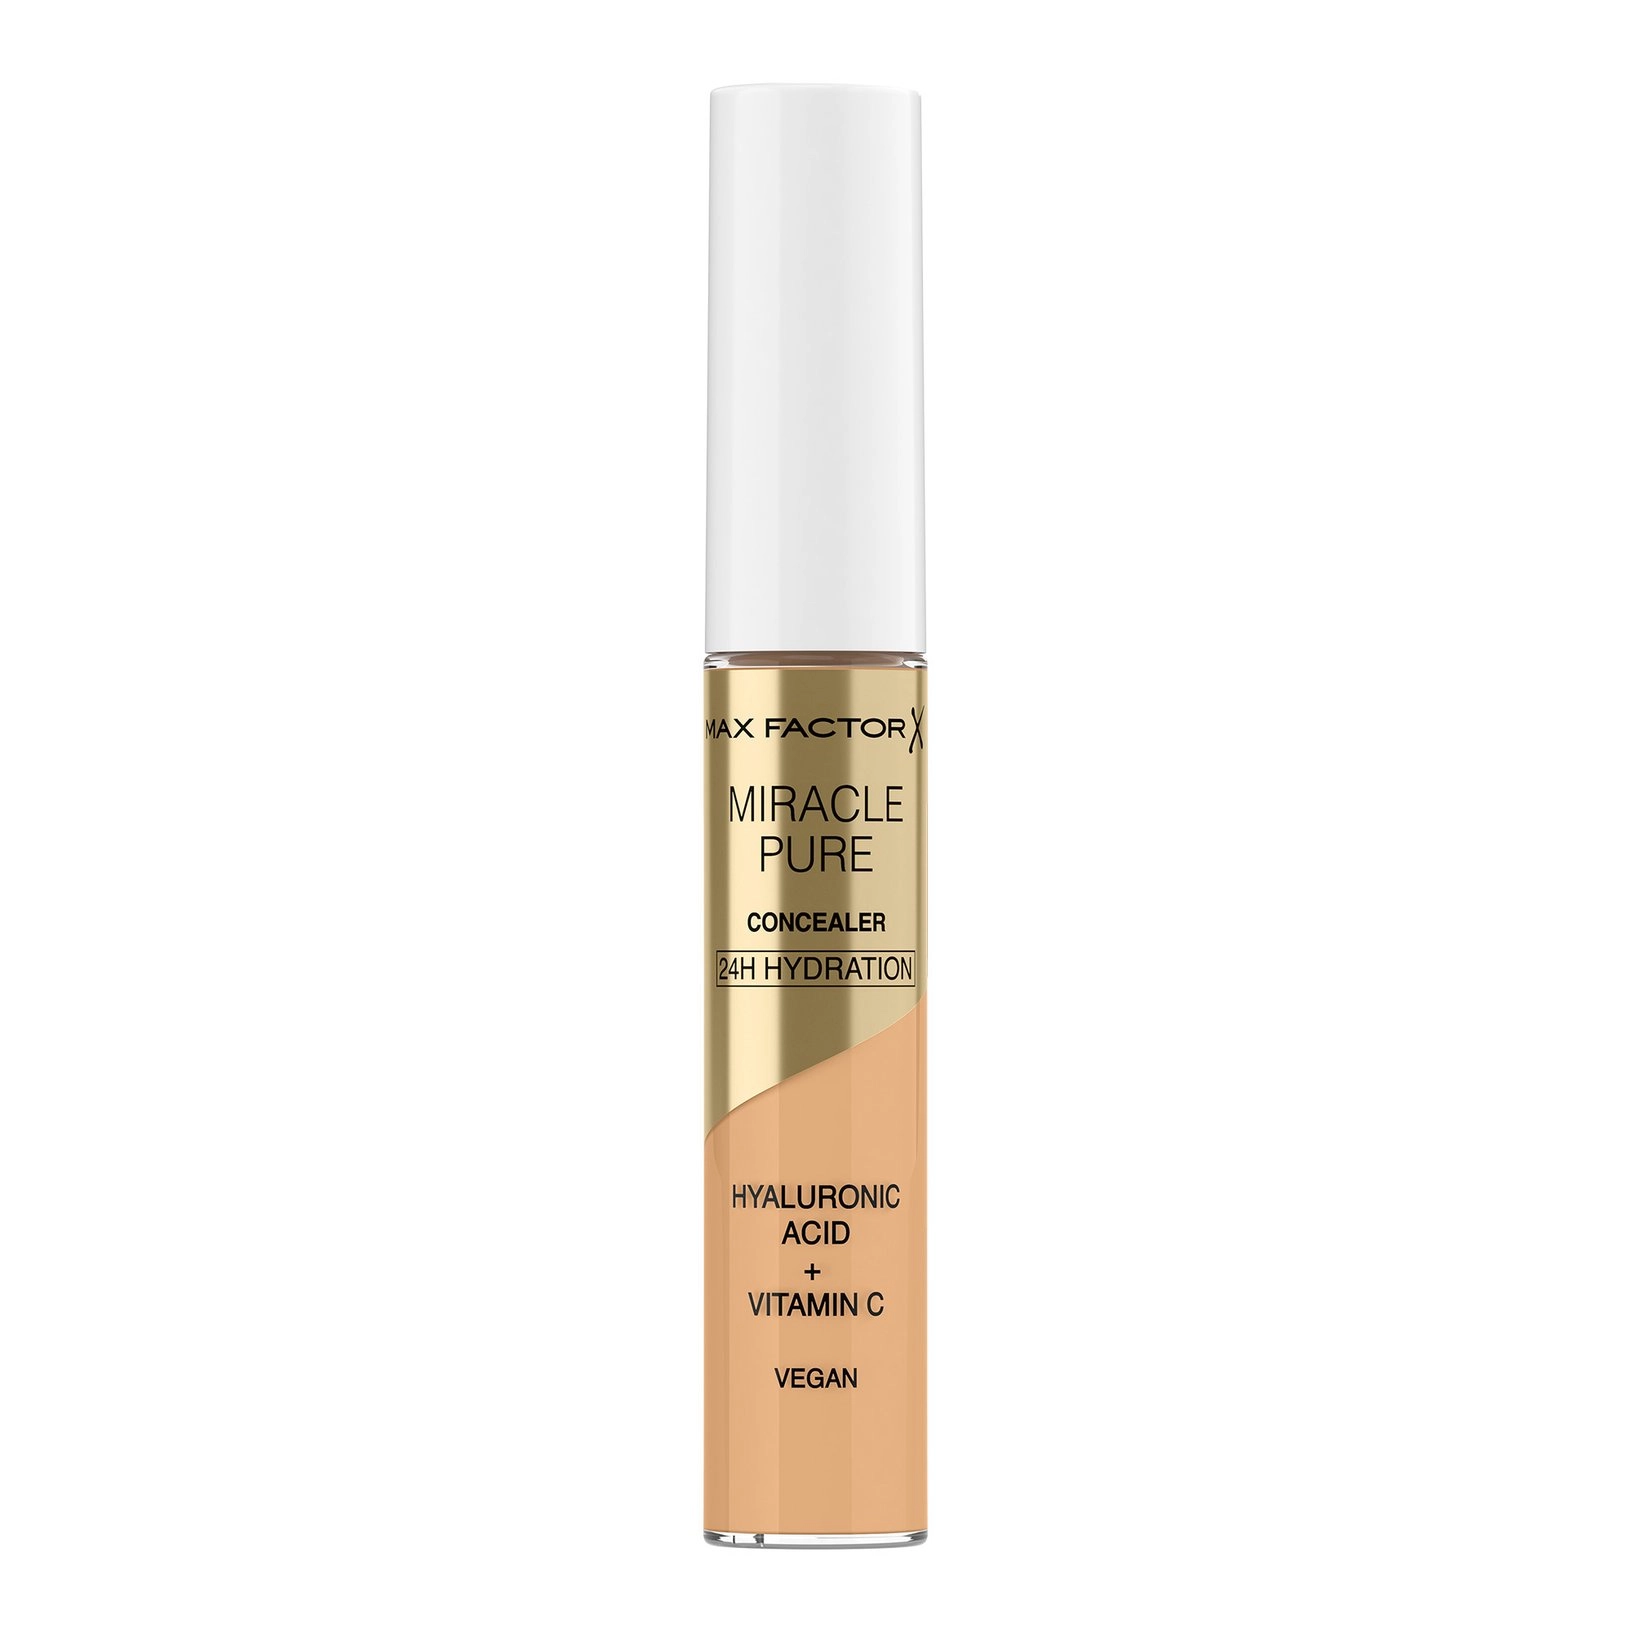 Image of Max Factor - Miracle Pure Concealer - 02